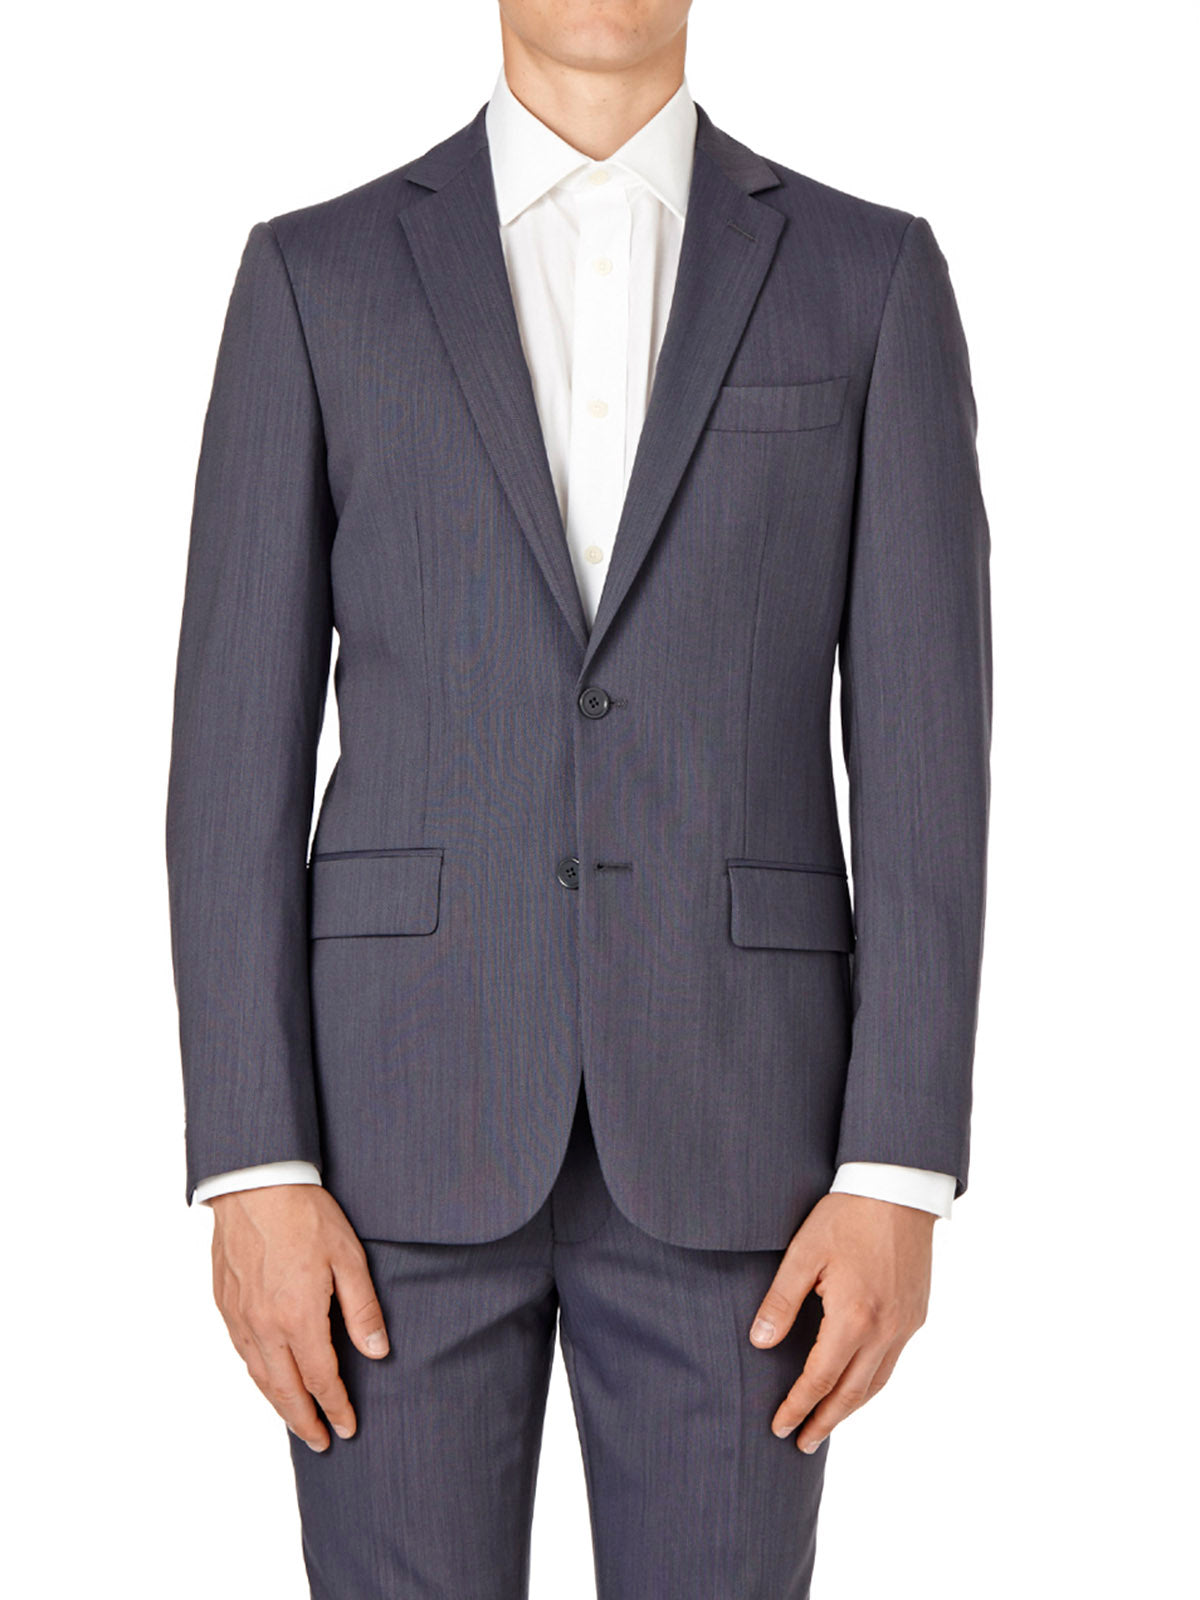 EMERSON JACKET STEEL MENS SUITS